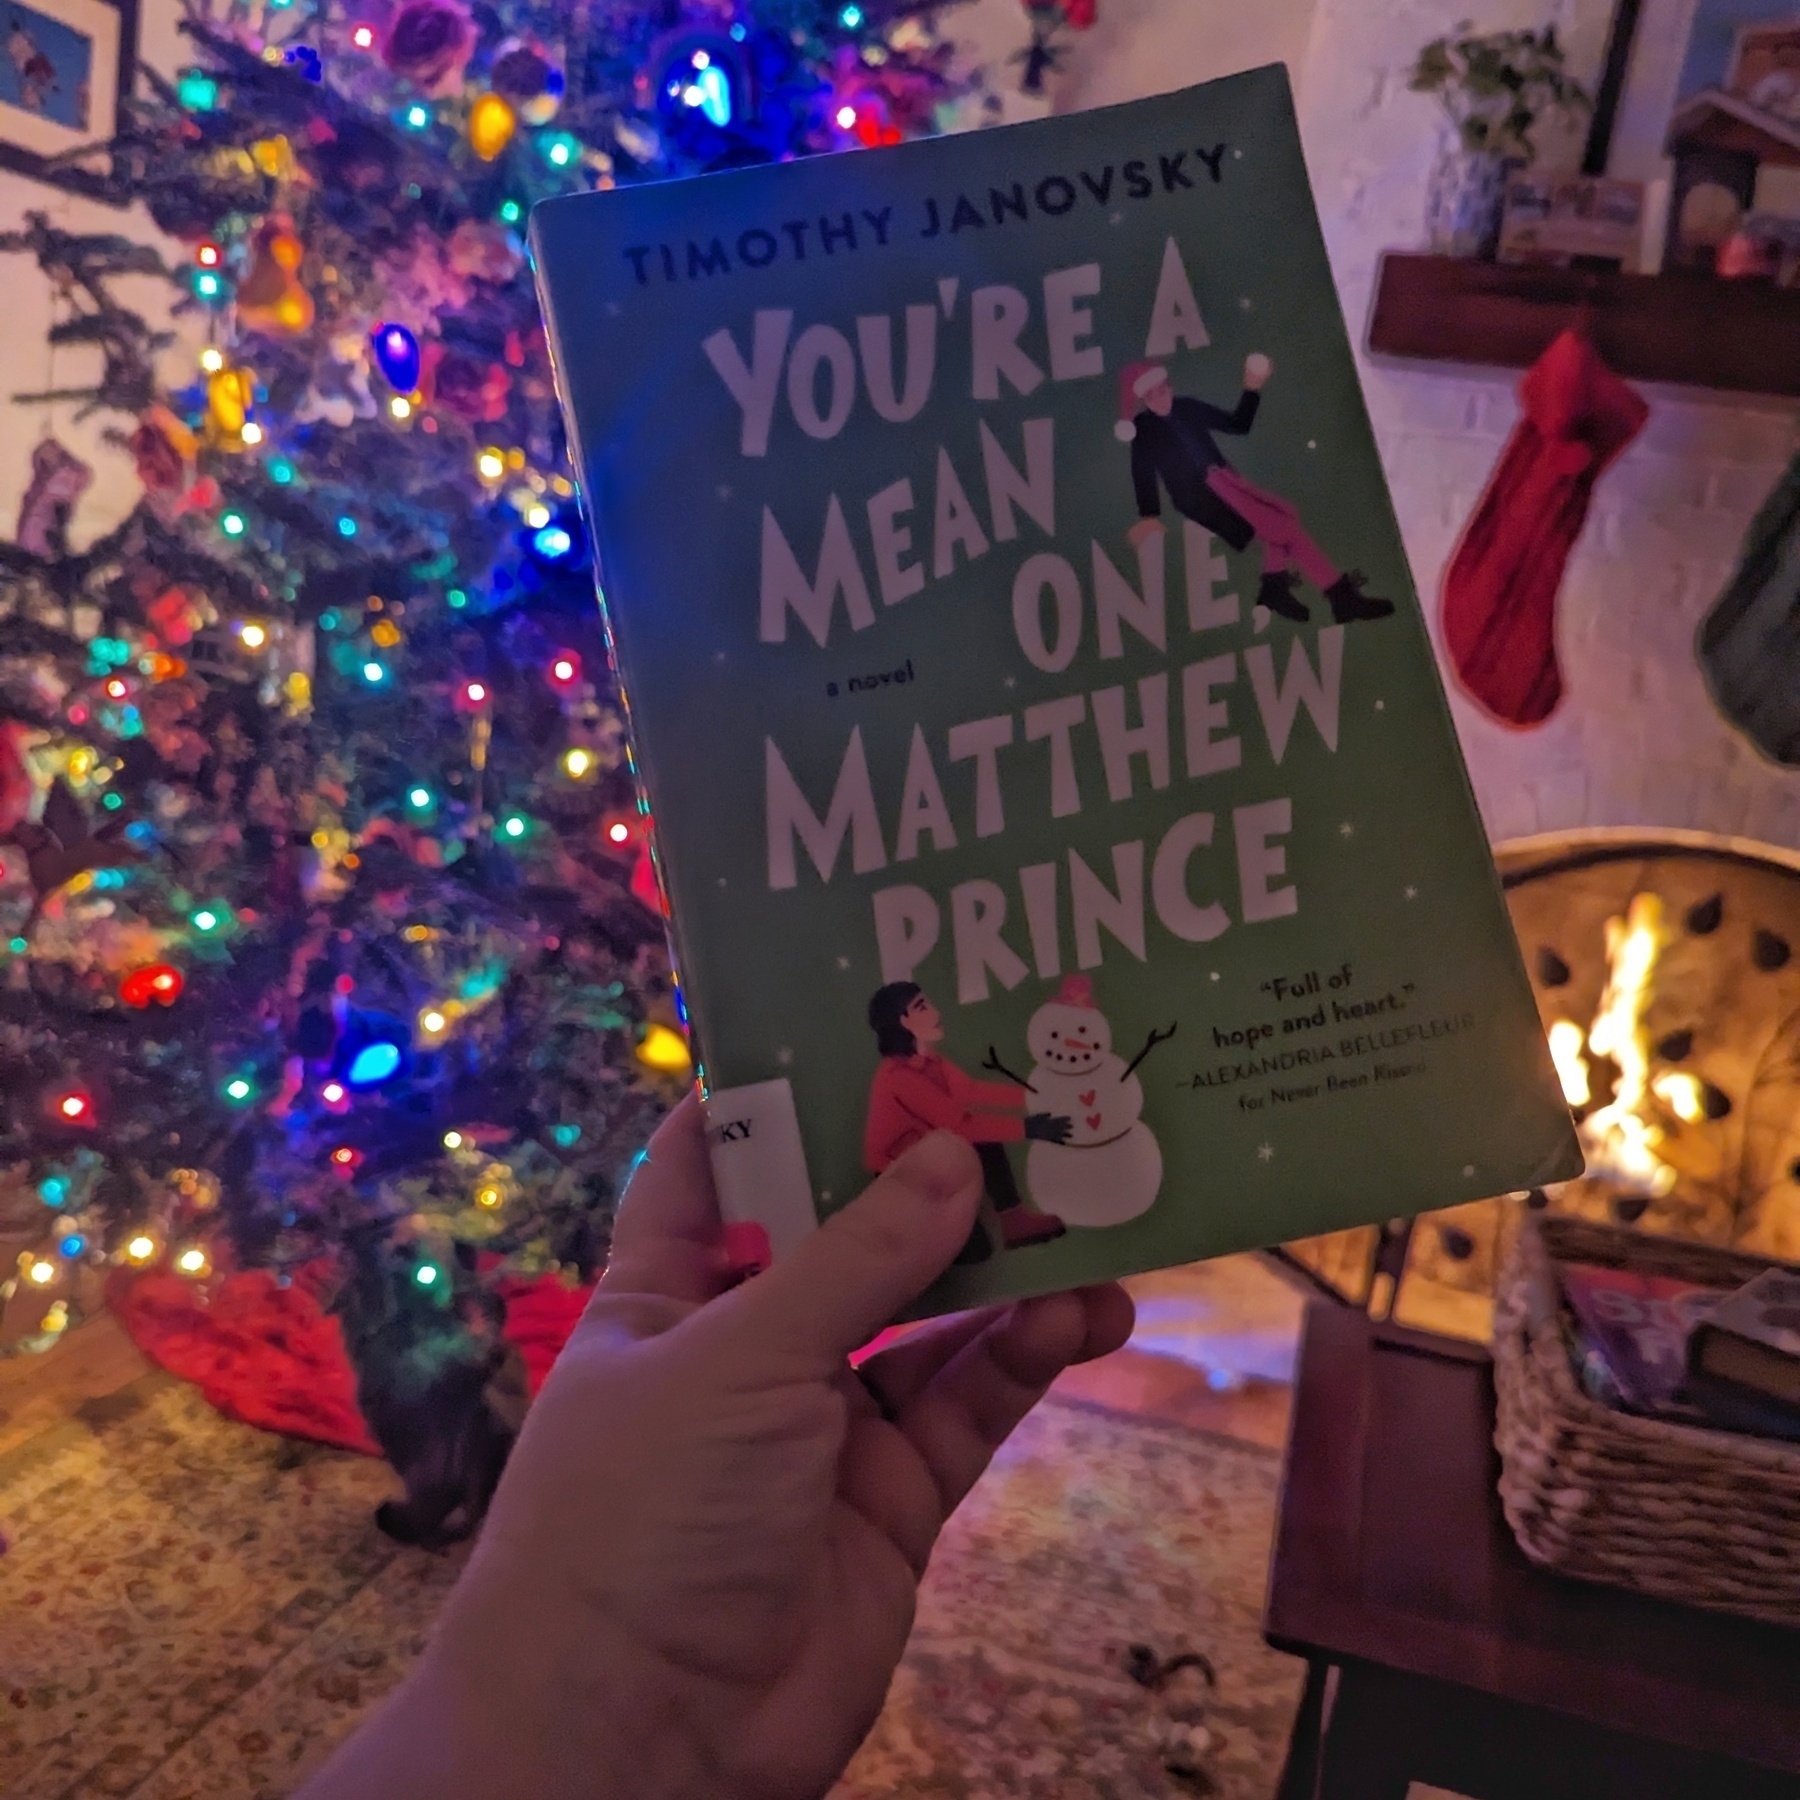 A hand holding a book titled YOU'RE A MEAN ONE MATTHEW PRINCE by TIMOTHY JANOVSKY in front of a decorated Christmas tree and a lit fireplace.